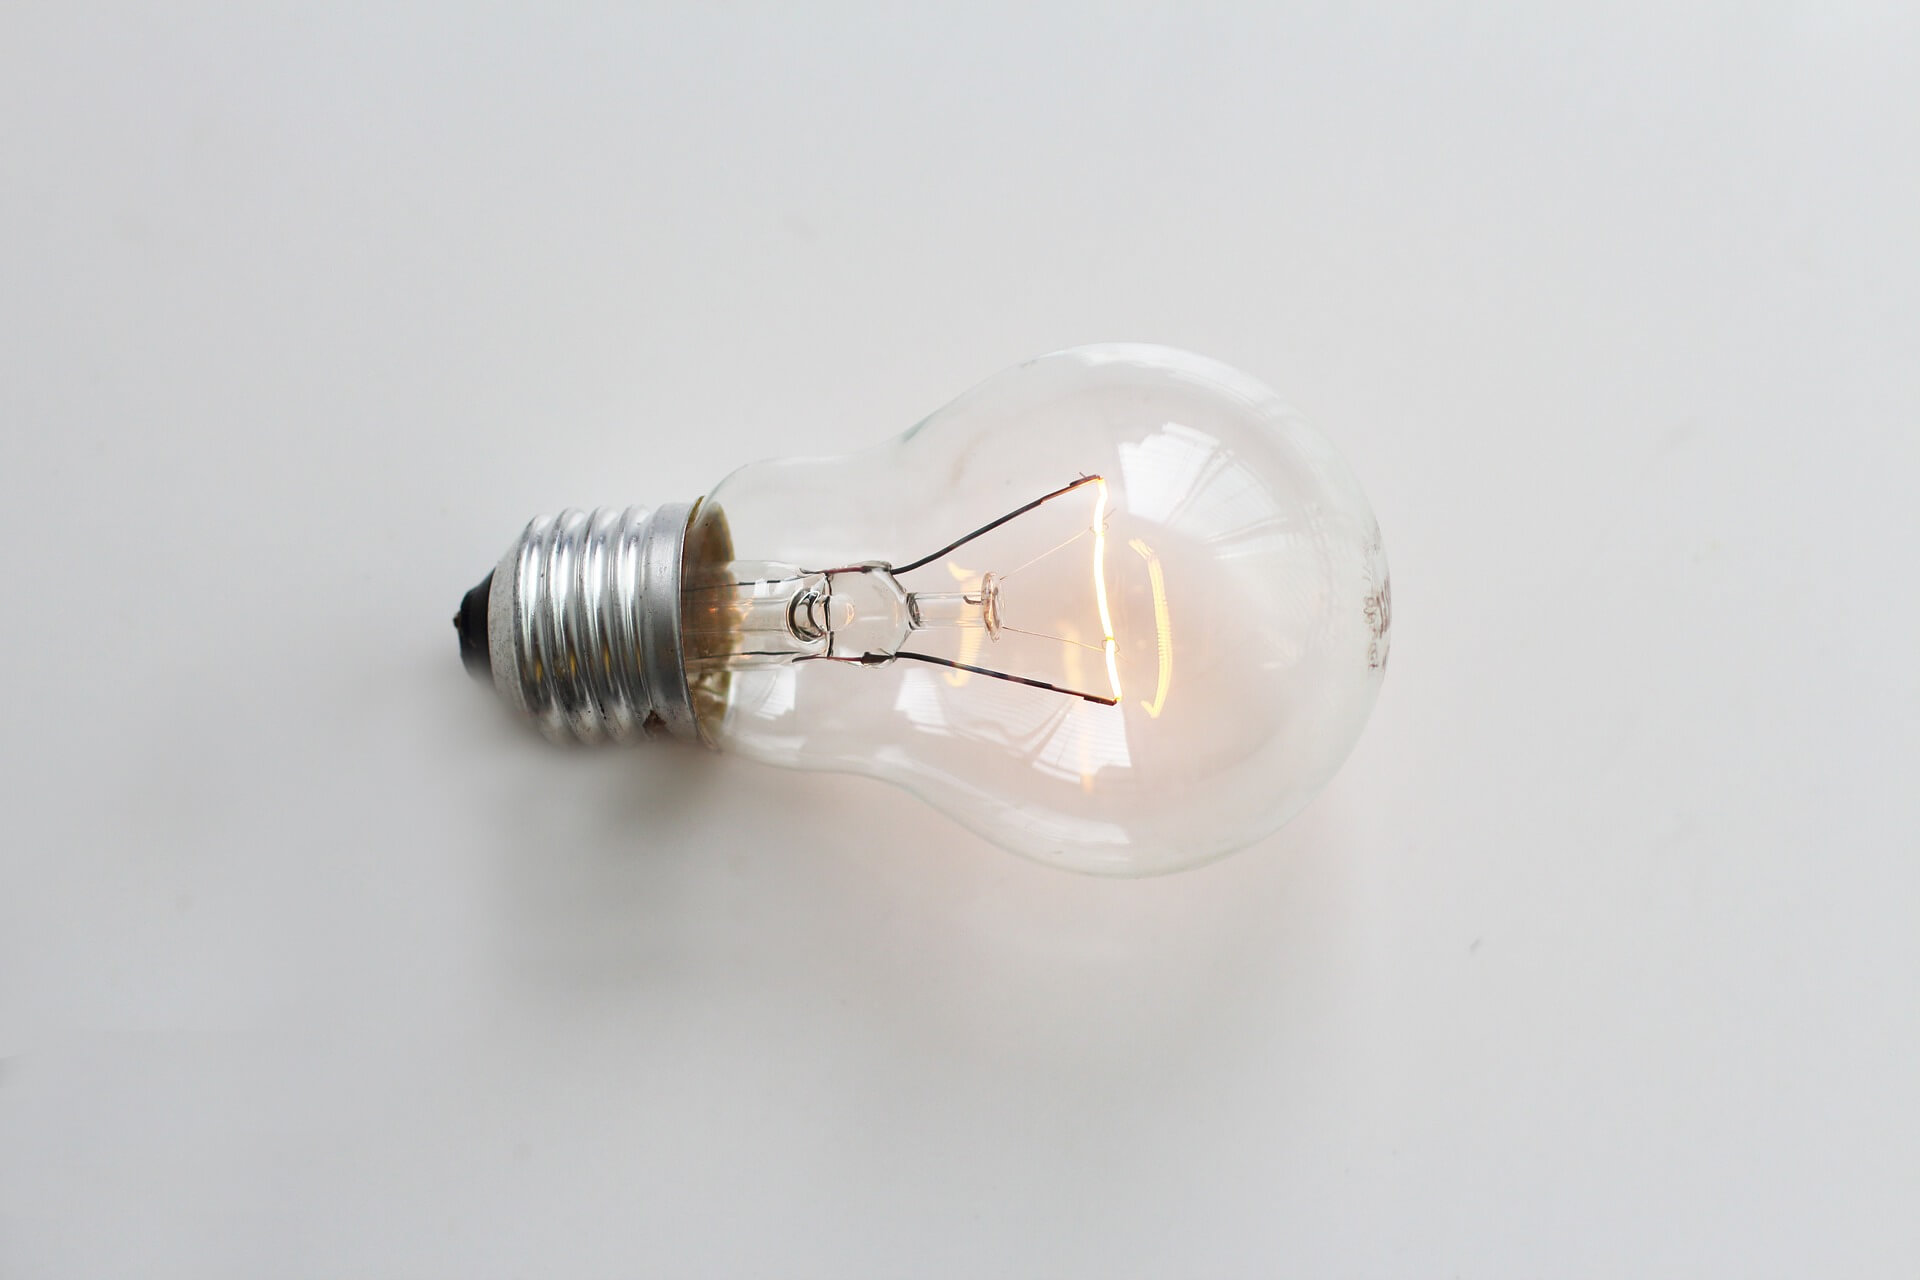 This image shows a lightbulb to illustrate the importance of non-profit best practices and trends